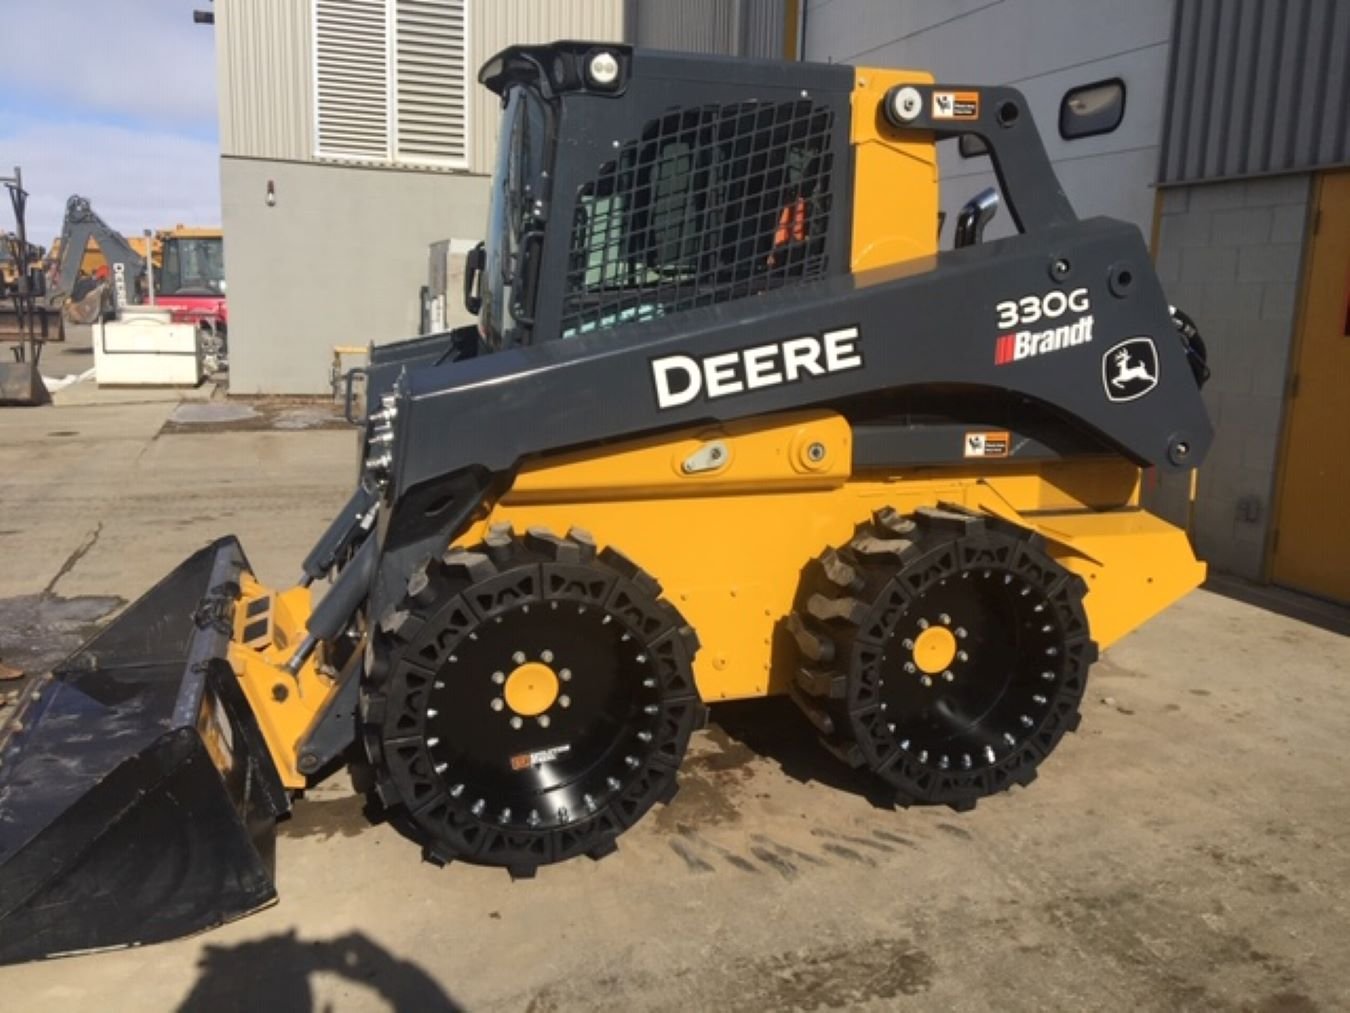 This image shows a Deere 330G skid steer using our all terrain skid steer tires.